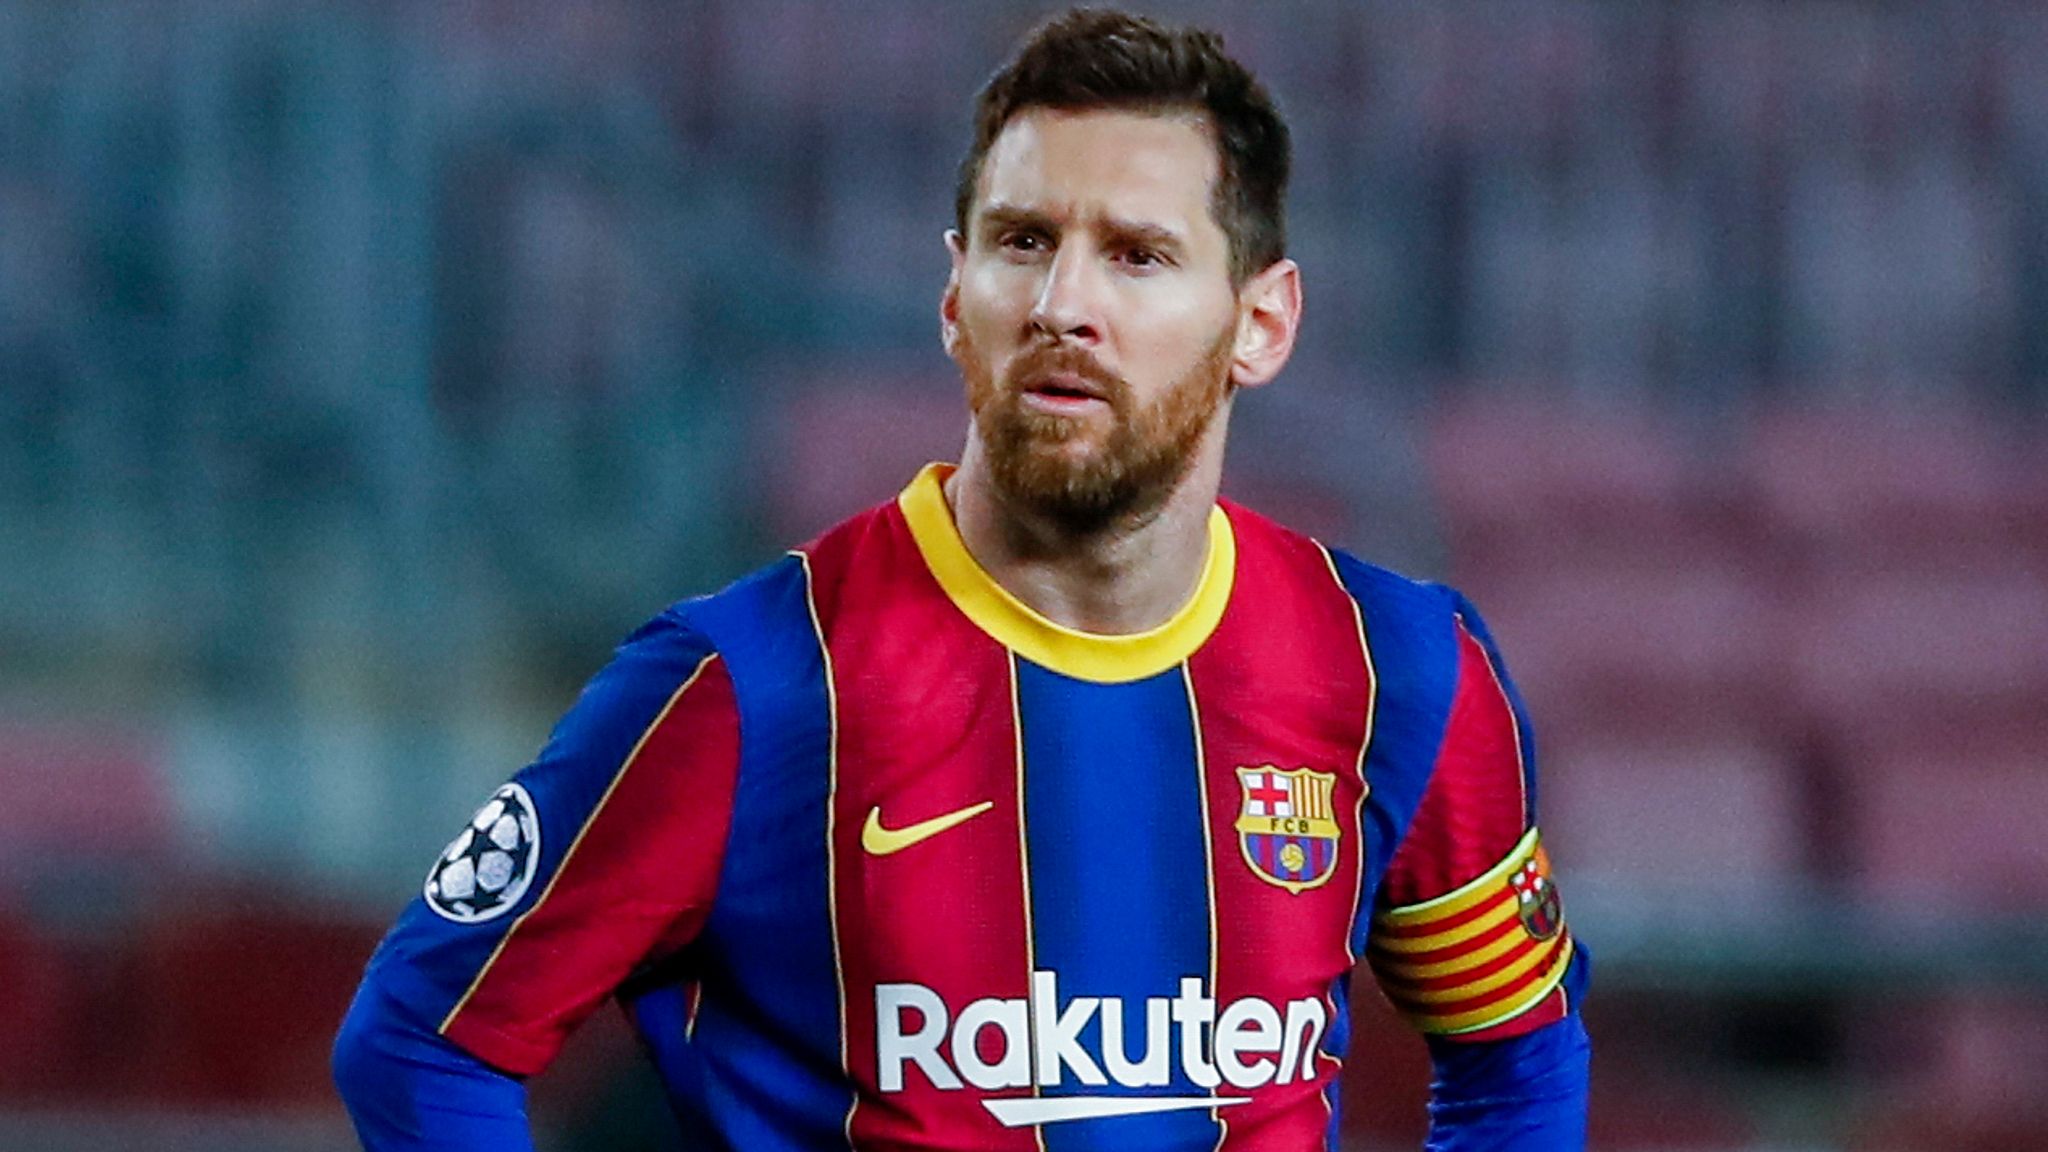 Lionel Messi in advanced transfer talks to join Paris Saint-Germain on  two-year deal after leaving Barcelona | Football News | Sky Sports